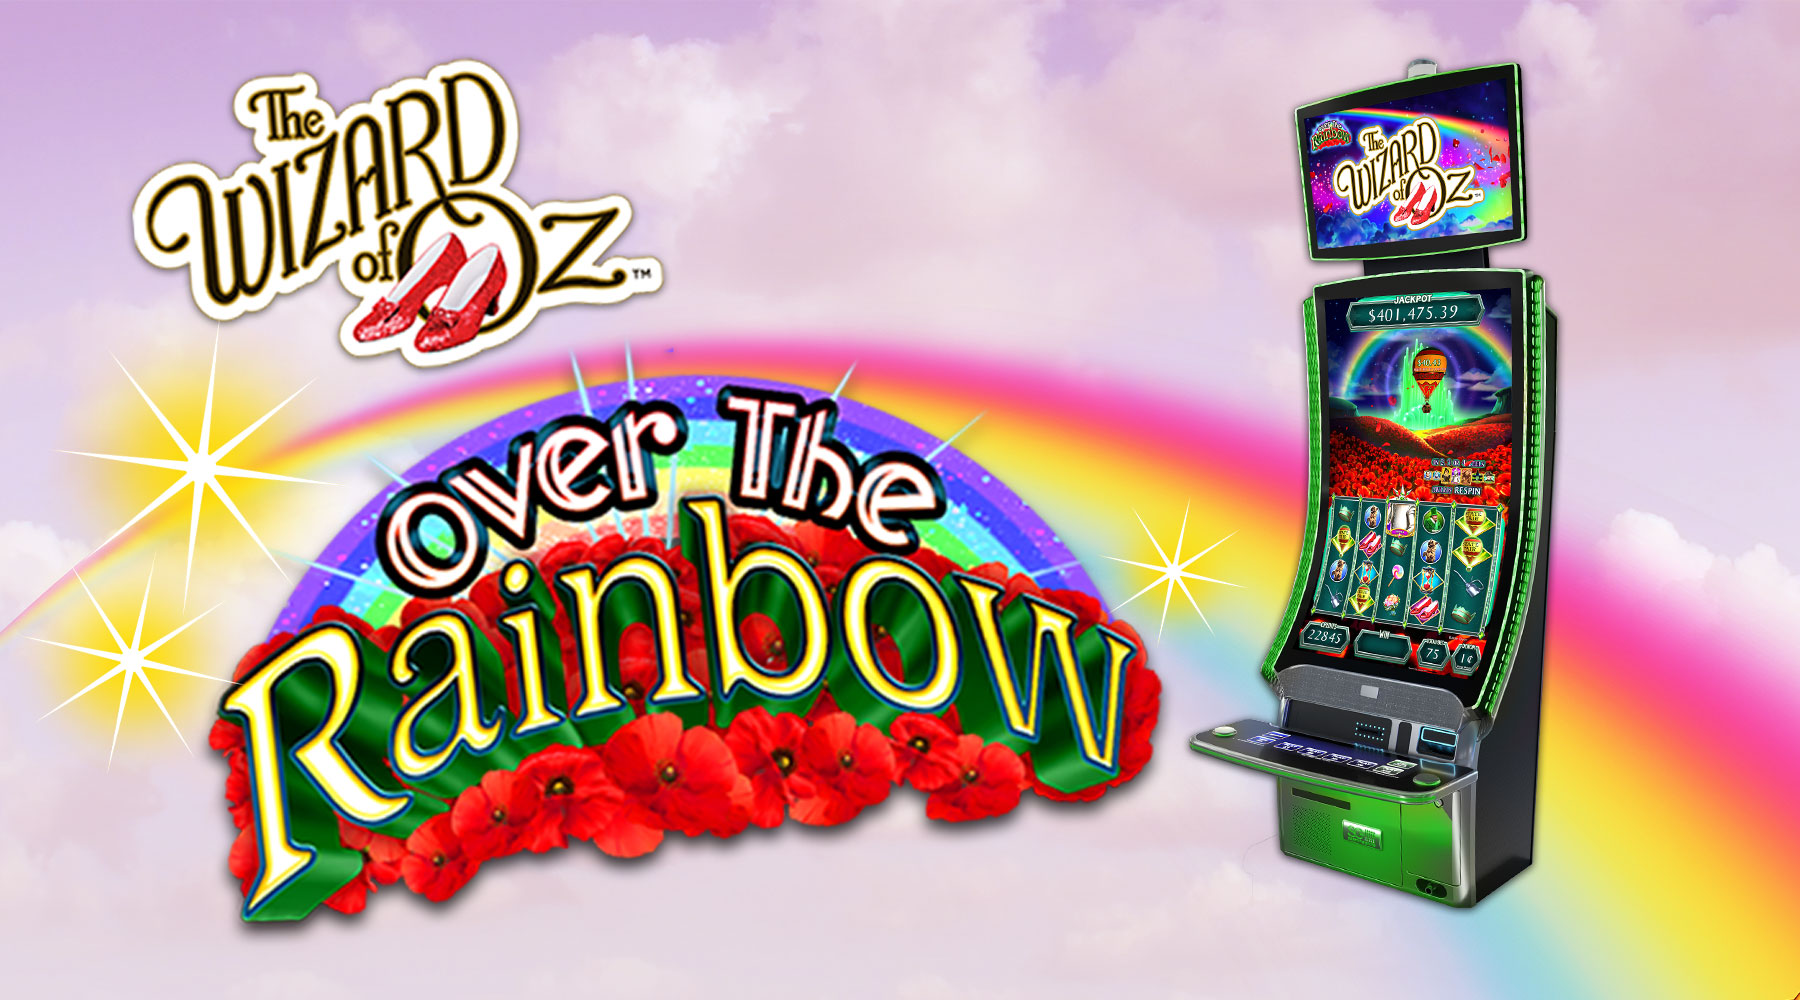 COMING SOON: The Wizard of Oz™ – Over The Rainbow™